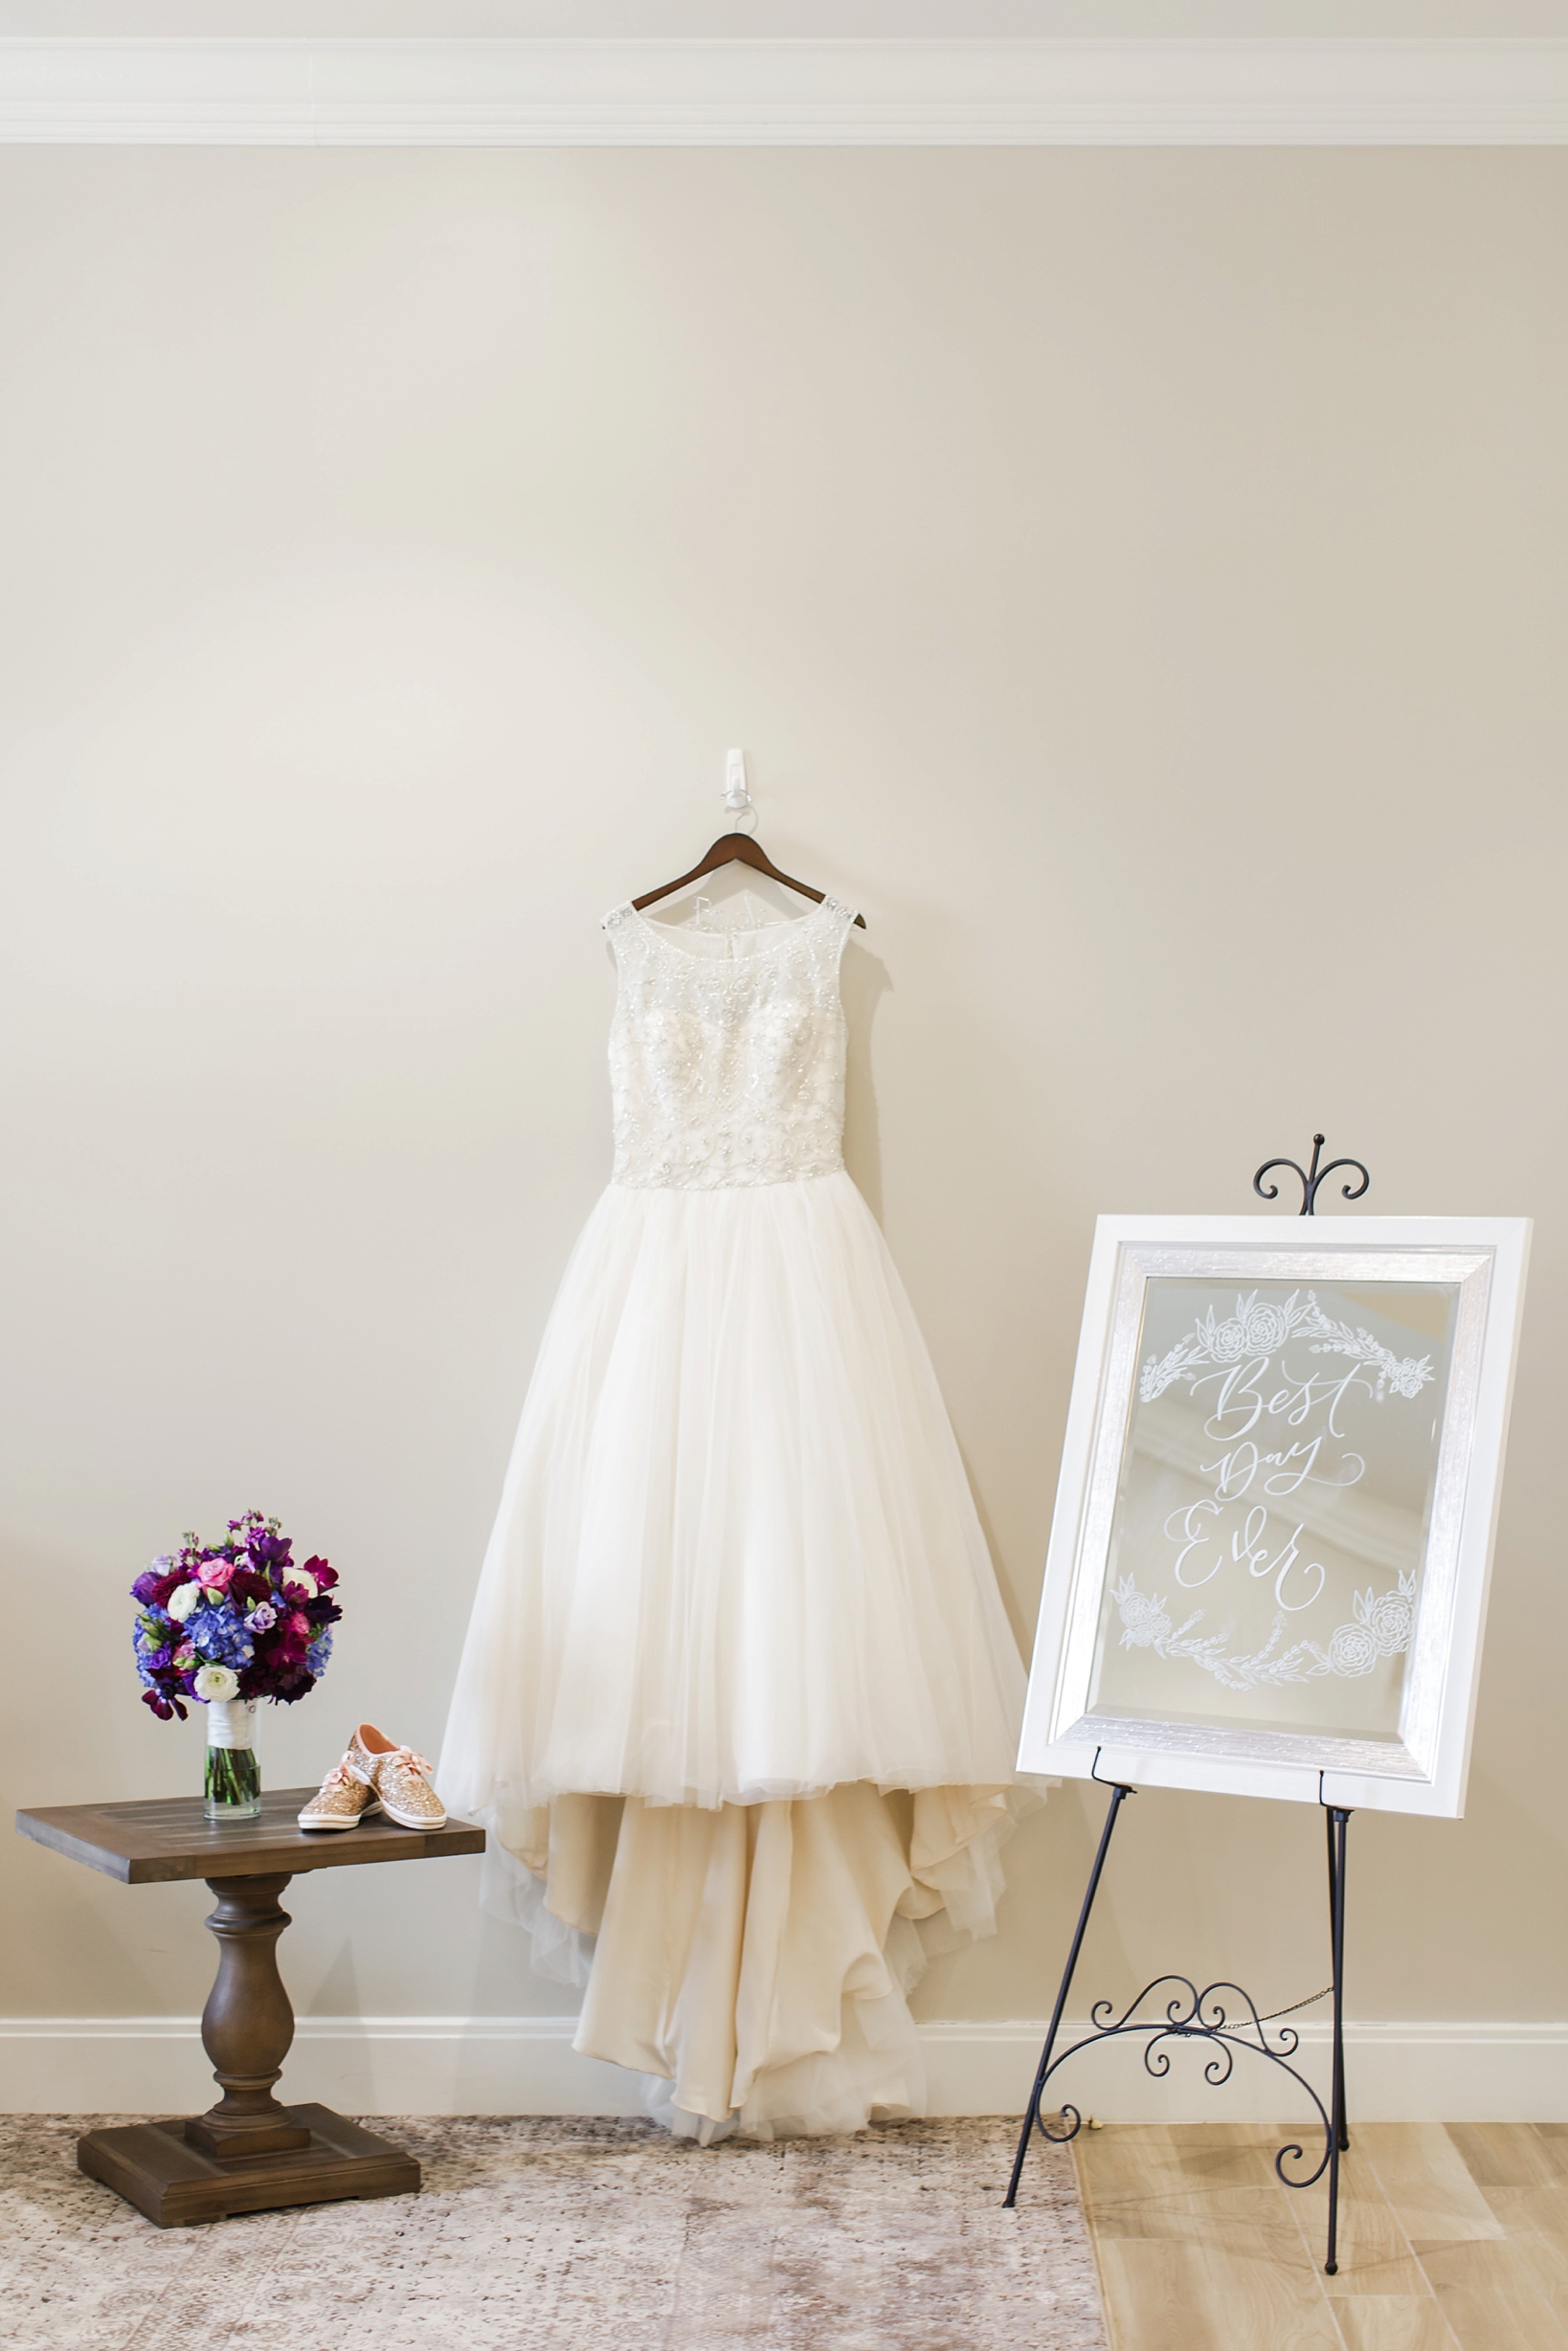 The wedding dress surrounded by the florals and custom mirror by Sarah & Ben Photography